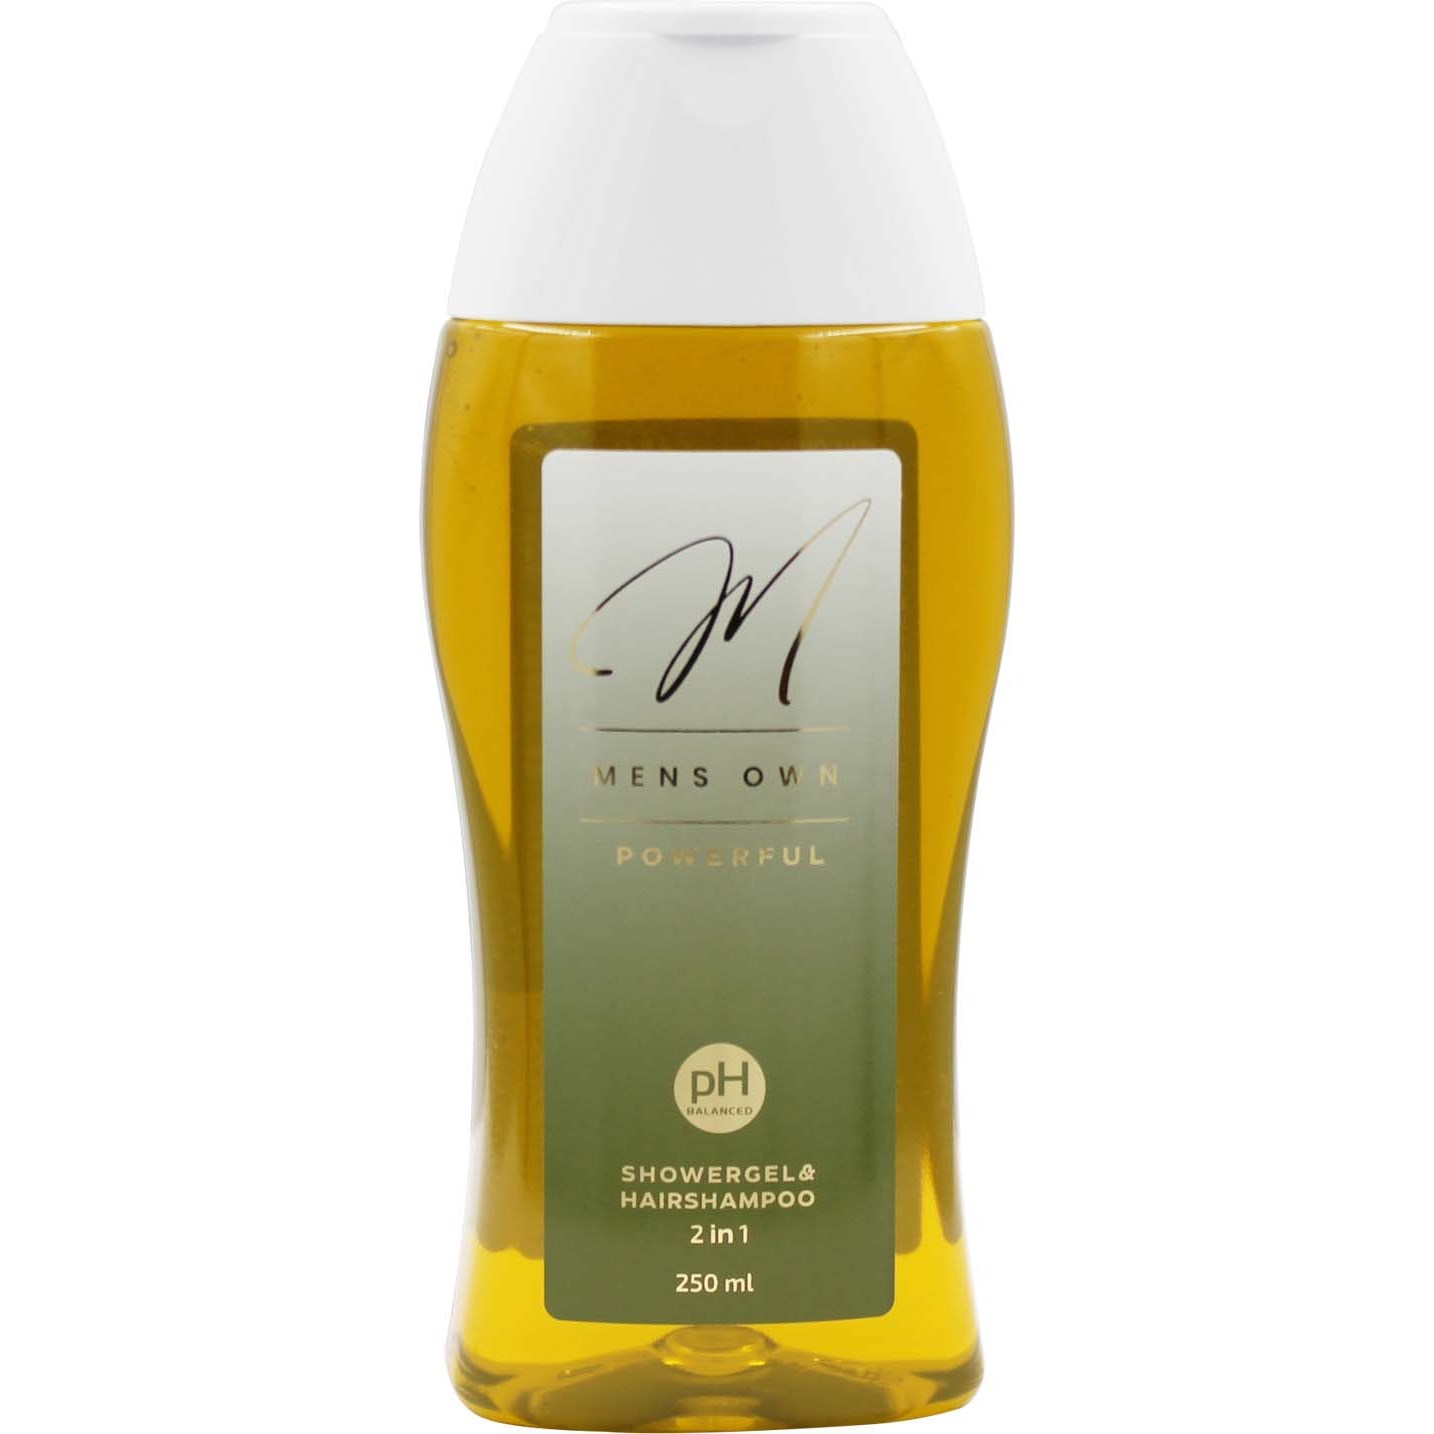 Mens Own spring collection 2-in-1 Shampoo & Showergel Powerfull 250 ml